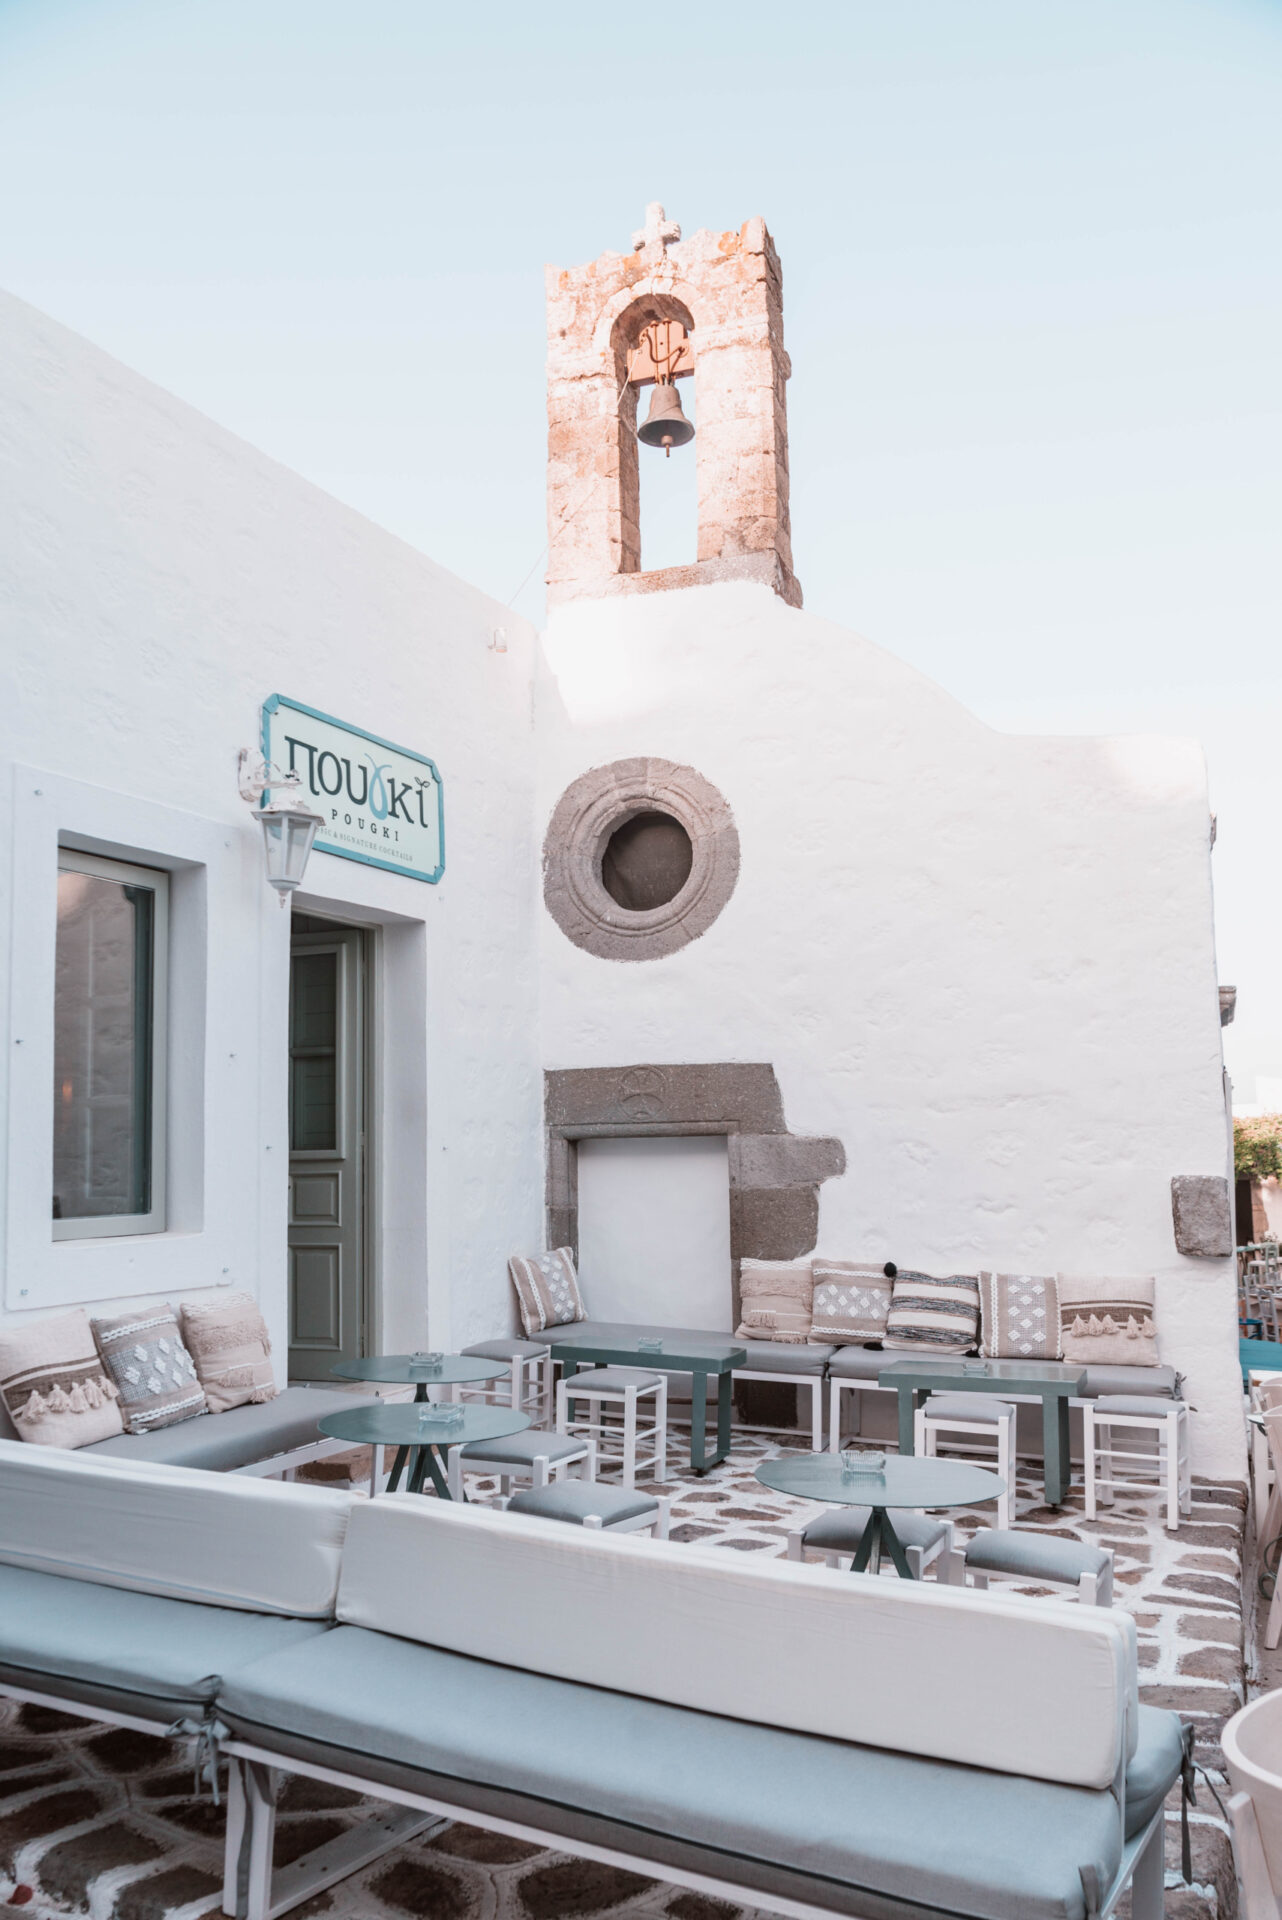 Insights Greece - 10 Best Things to do in Patmos